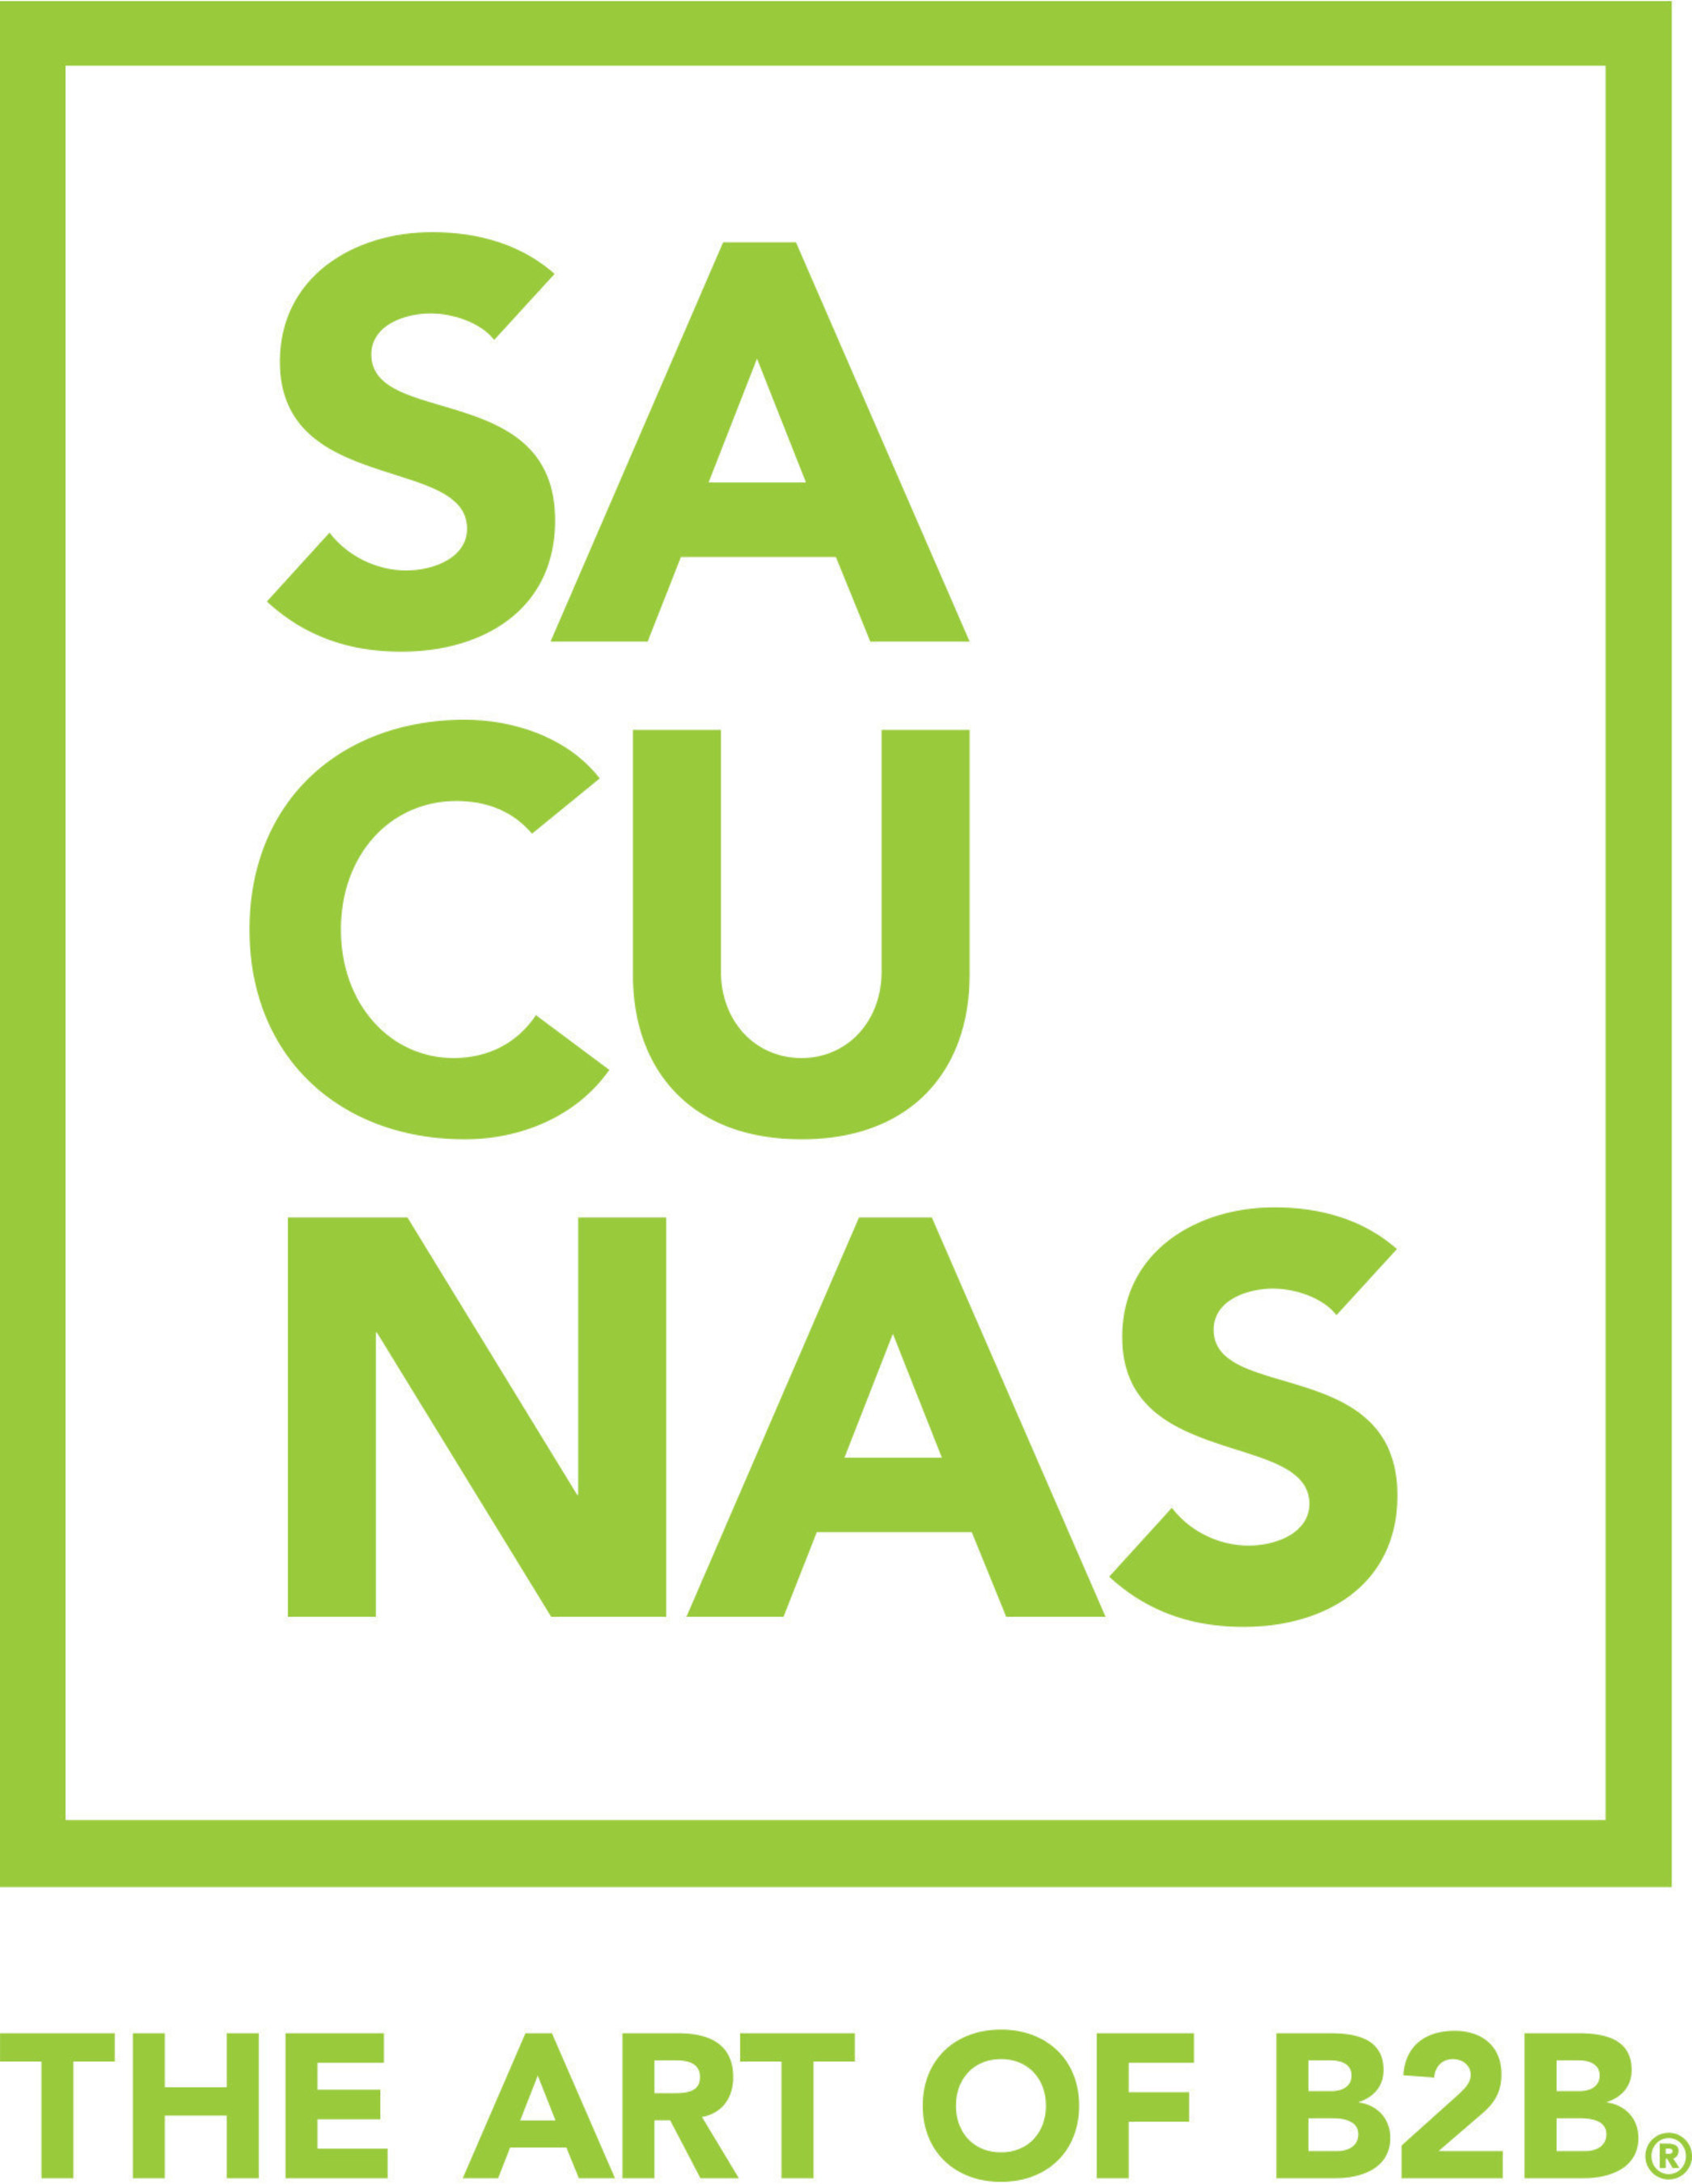 Sacunas helps the best B2B brands tell compelling stories and create exceptional experiences that motivate markets, customer teams and individual buyers.